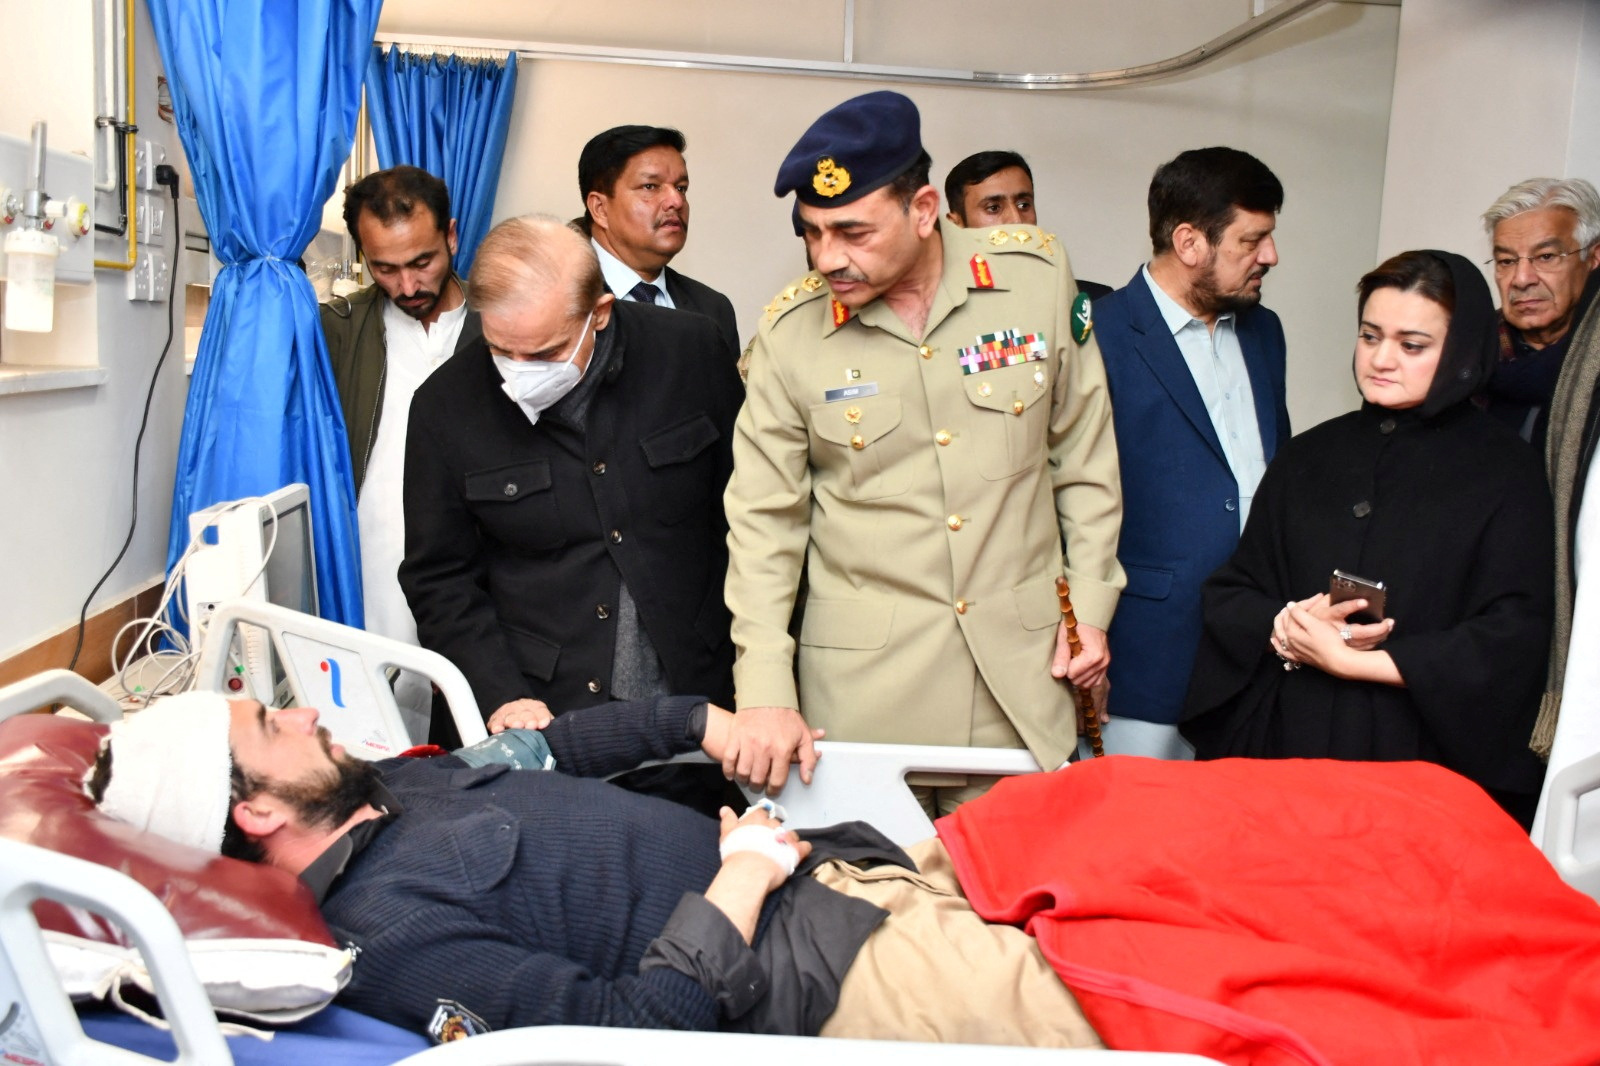 Chief of Army Staff of Pakistan Asim Munir and Pakistan's Prime Minister Shehbaz Sharif visit an injured, at a hospital in Peshawar